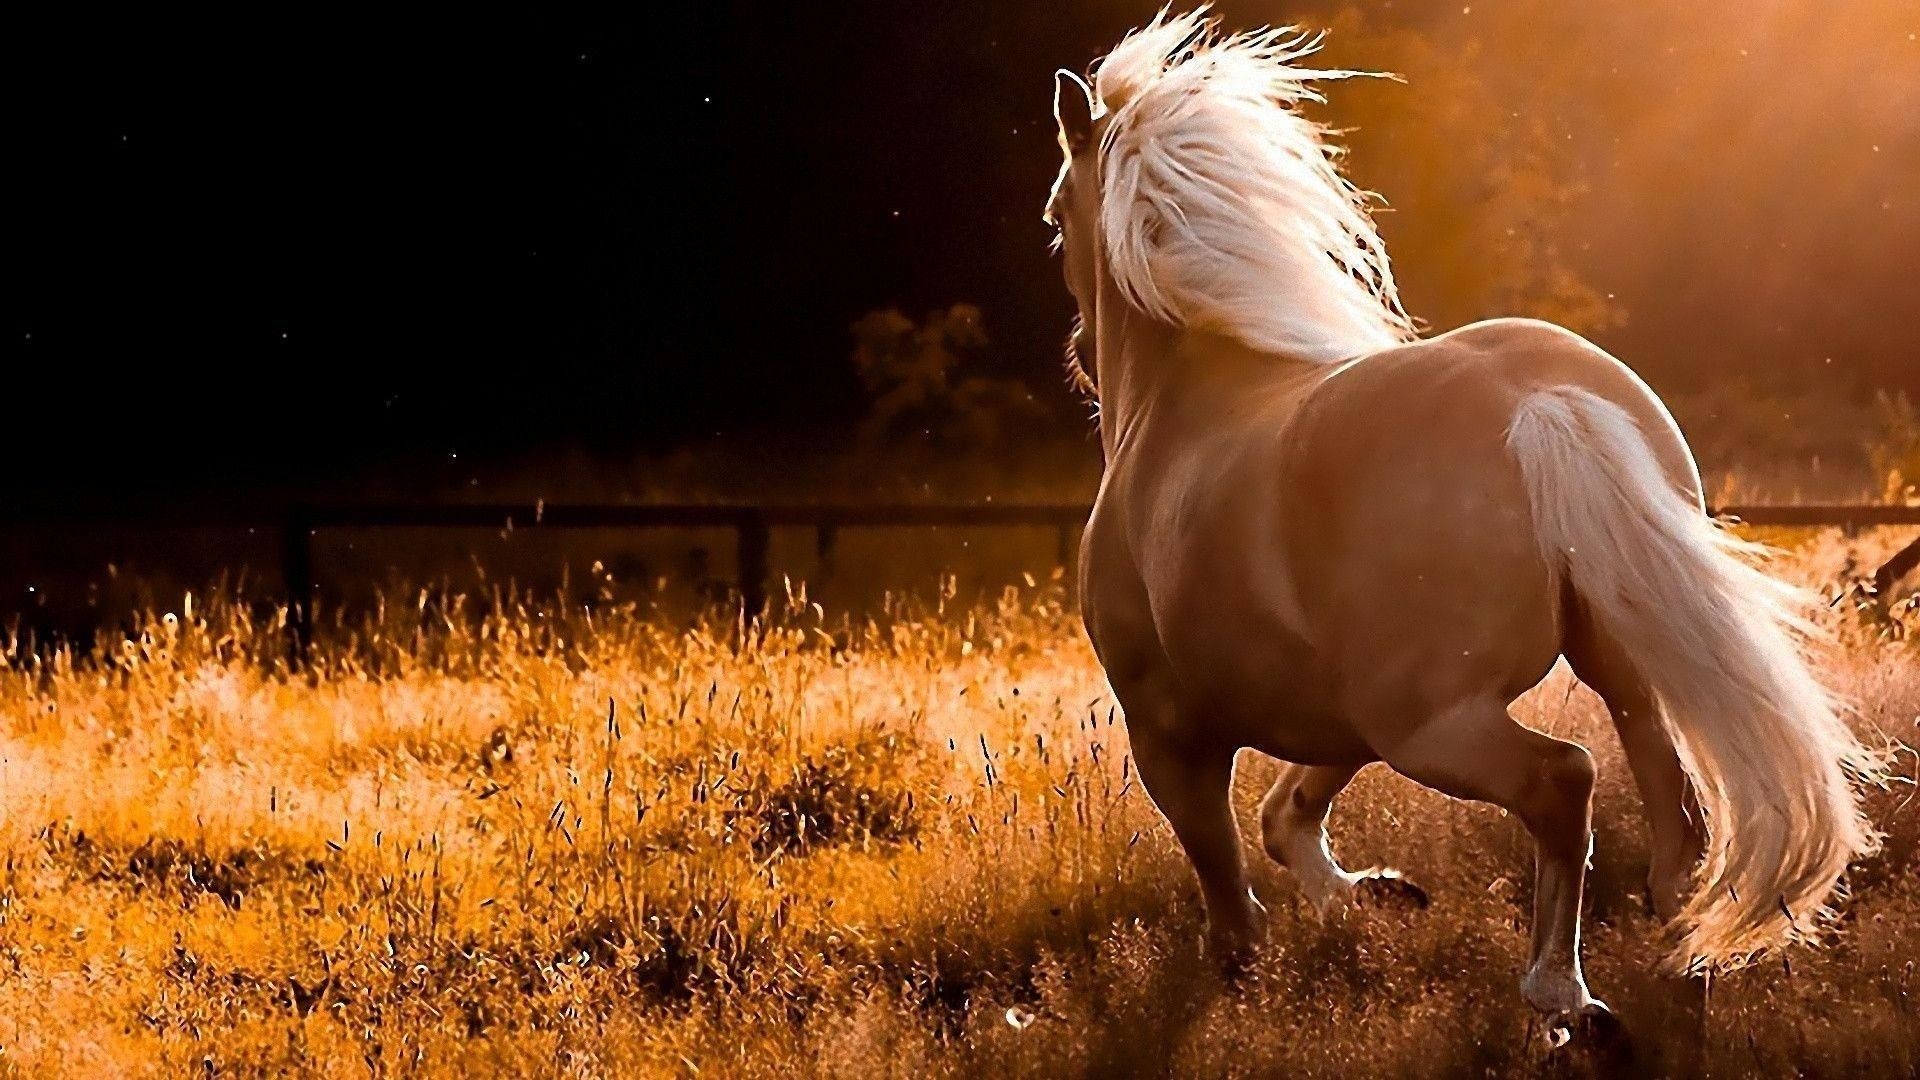 Horse: Equus caballus, used for riding and for drawing or carrying loads. 1920x1080 Full HD Background.